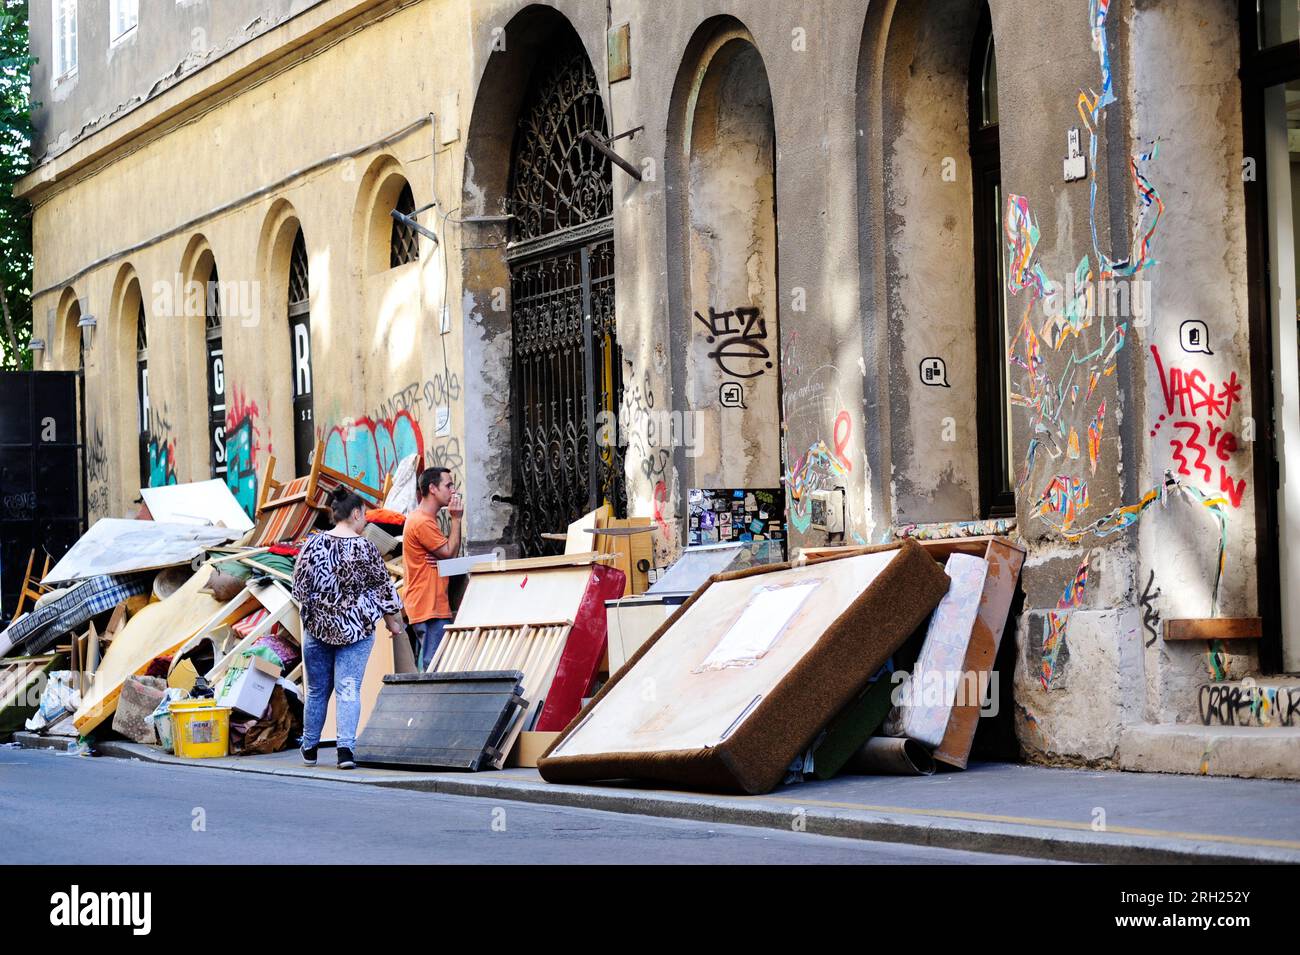 Budapest, Hungary. June 05, 2015. Bulky waste on a street in Budapest Stock Photo